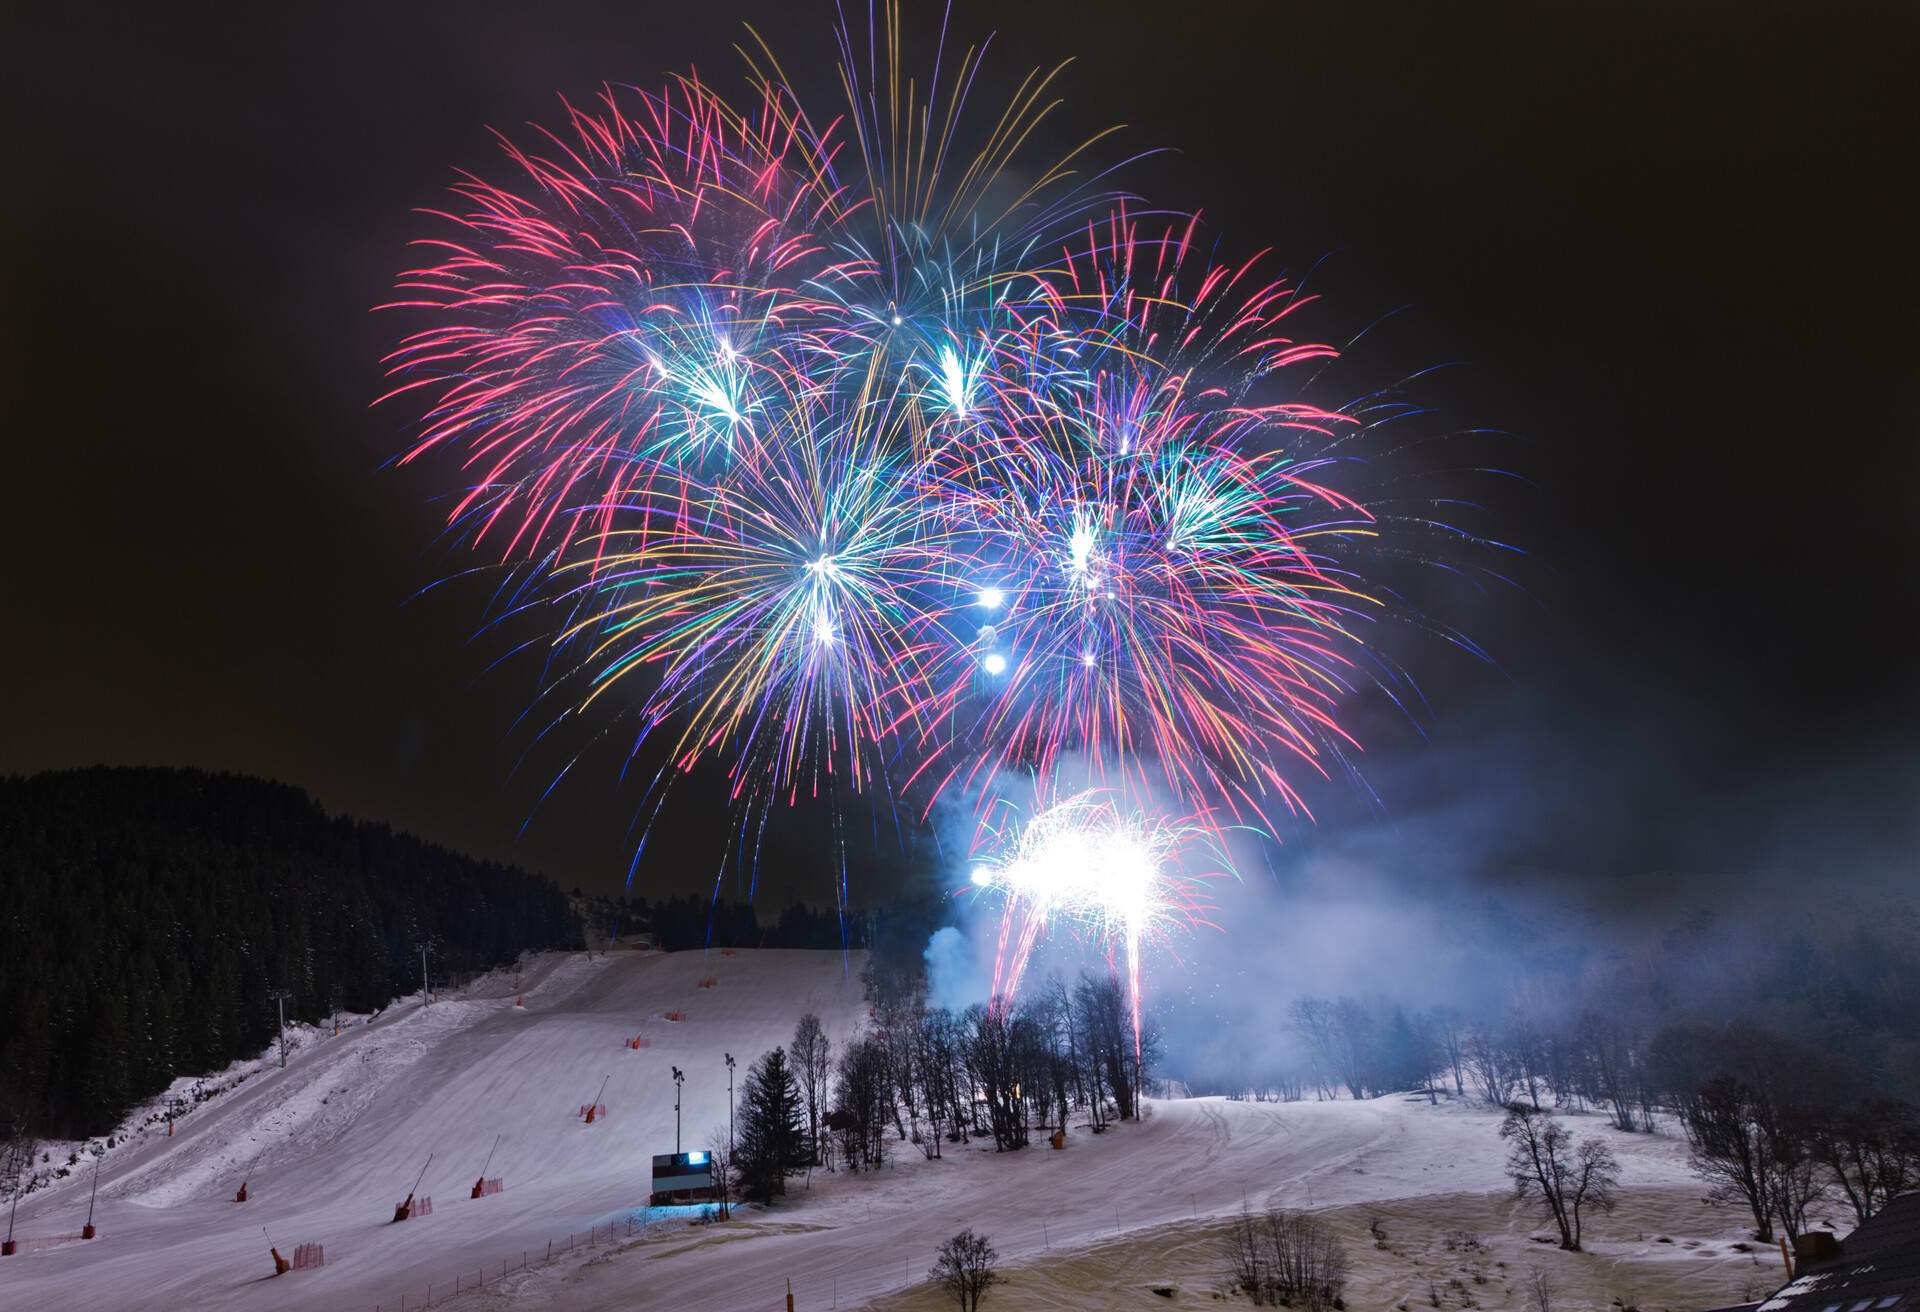 Fireworks are shot for the elebration of russian christmas. in Meribel, France.The haute savoie has become a top destination for rich russianple rich people; Shutterstock ID 89174161